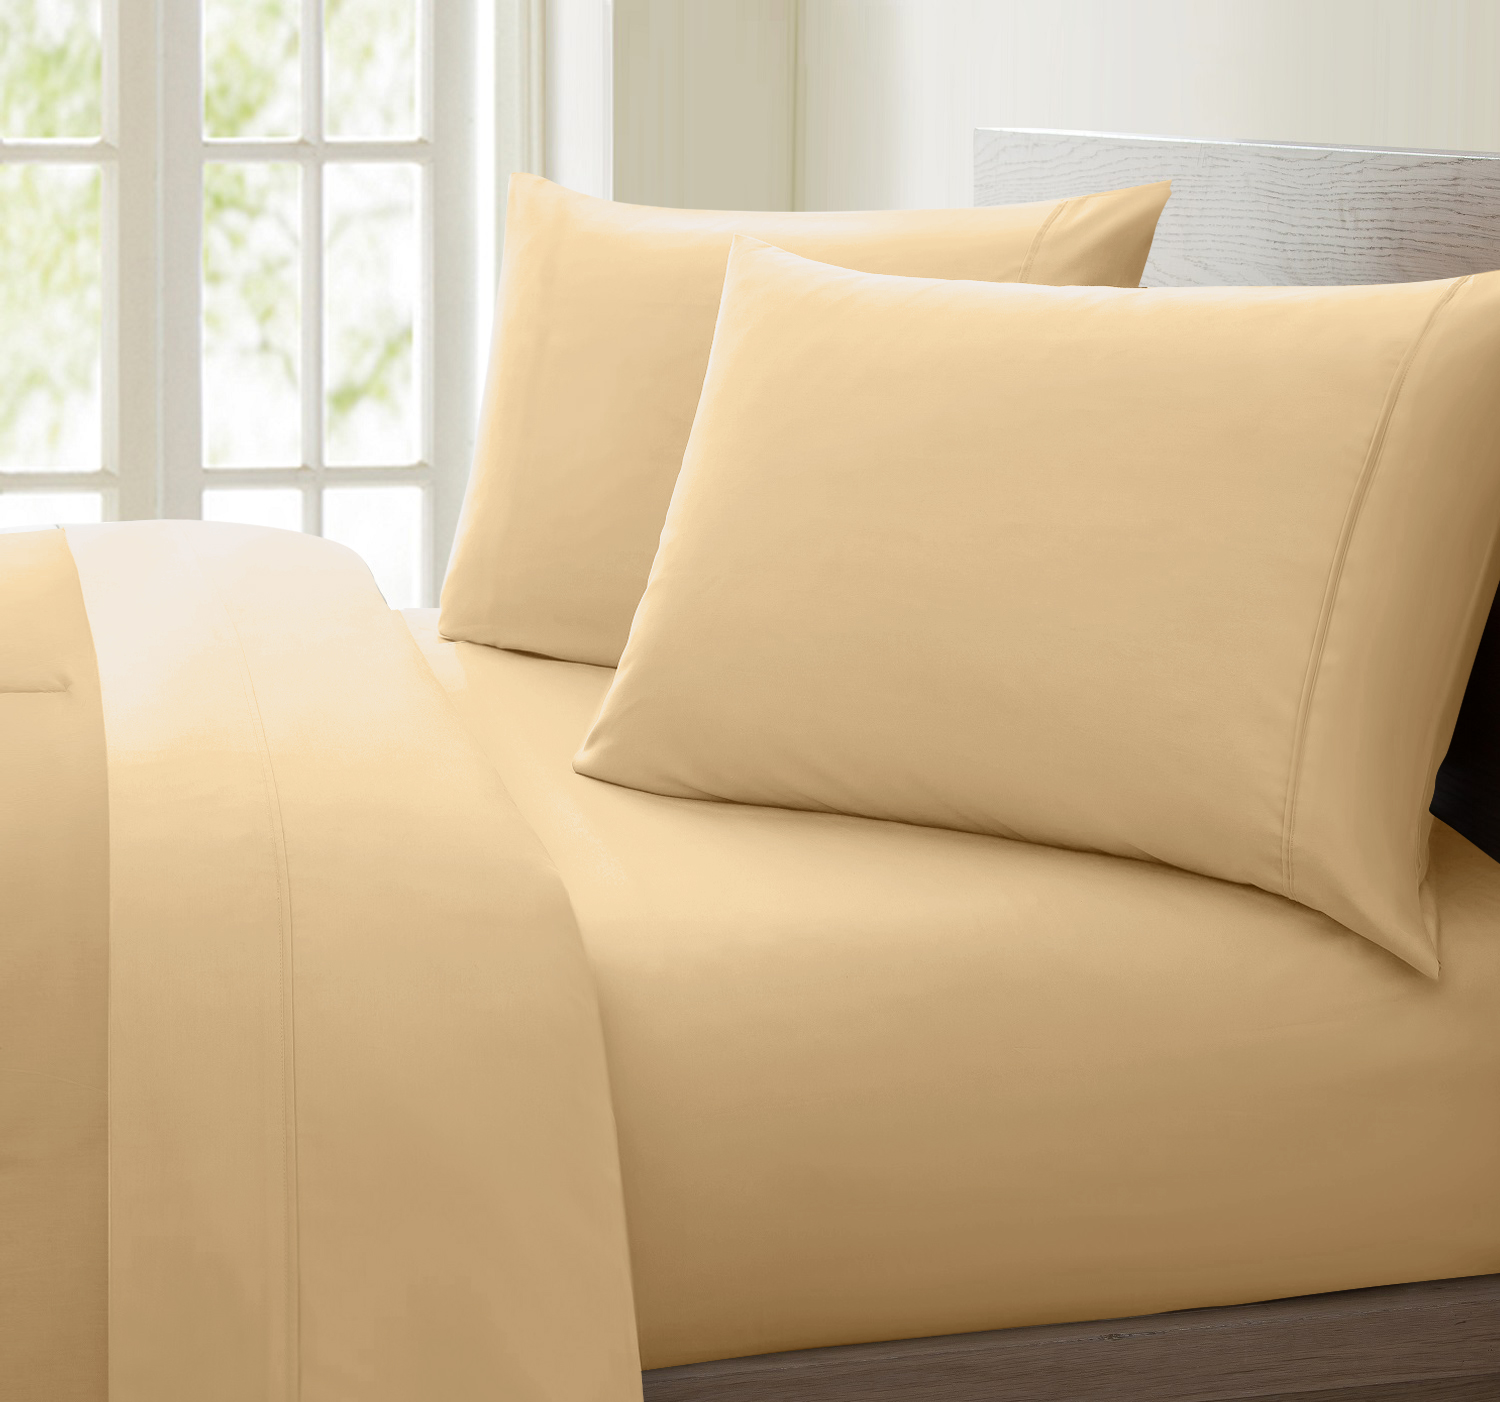 Home Sweet Home Dreams Inc Oxford Collection 600 Thread Count Deep Pocket Egyptian Quality Cotton Solid Sheet Set